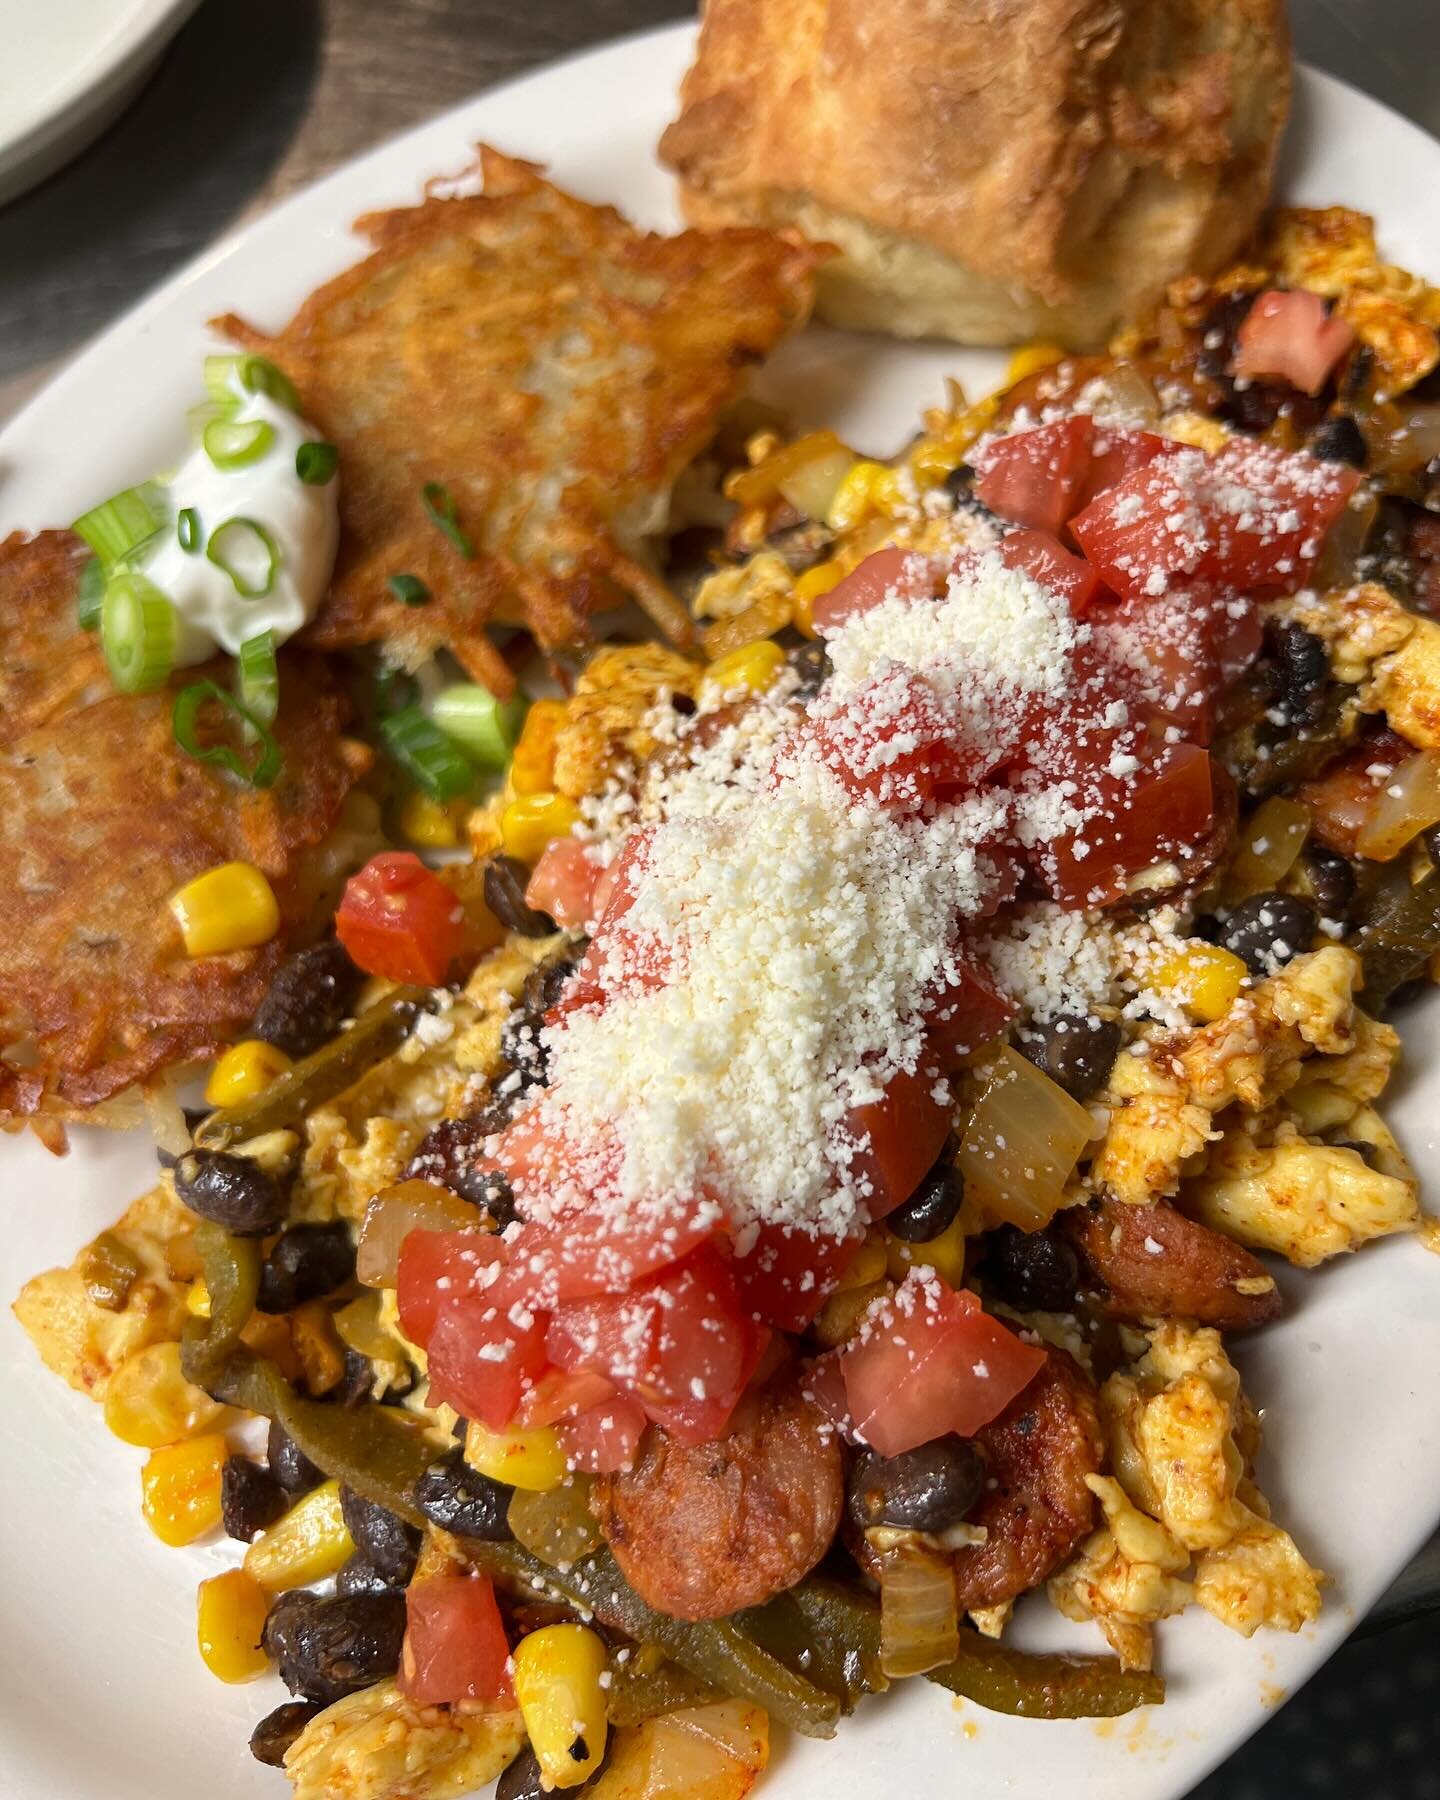 Come and get this delicious special while it lasts! We are serving up a two egg scramble with lingui&ccedil;a sausage, onion, corn, black beans and roasted poblano topped with cotija cheese and diced tomatoes, comes with a choice of potato cakes or c